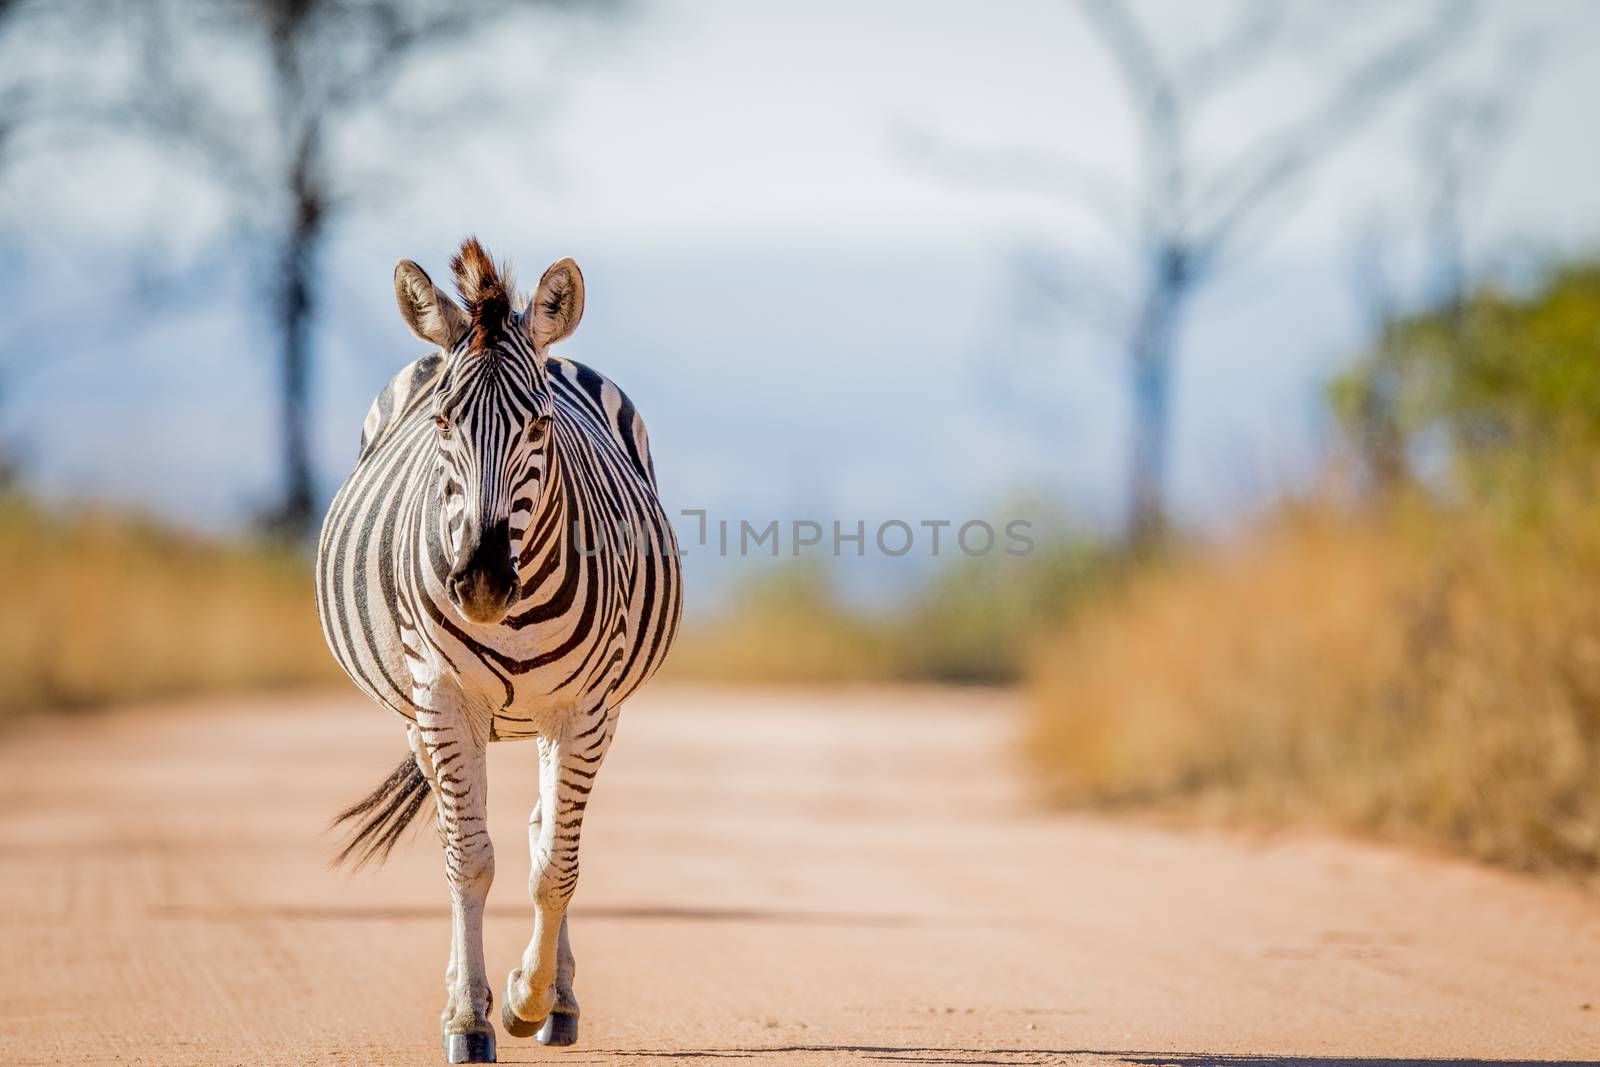 Zebra walking on the road in the Kruger National Park, South Africa.